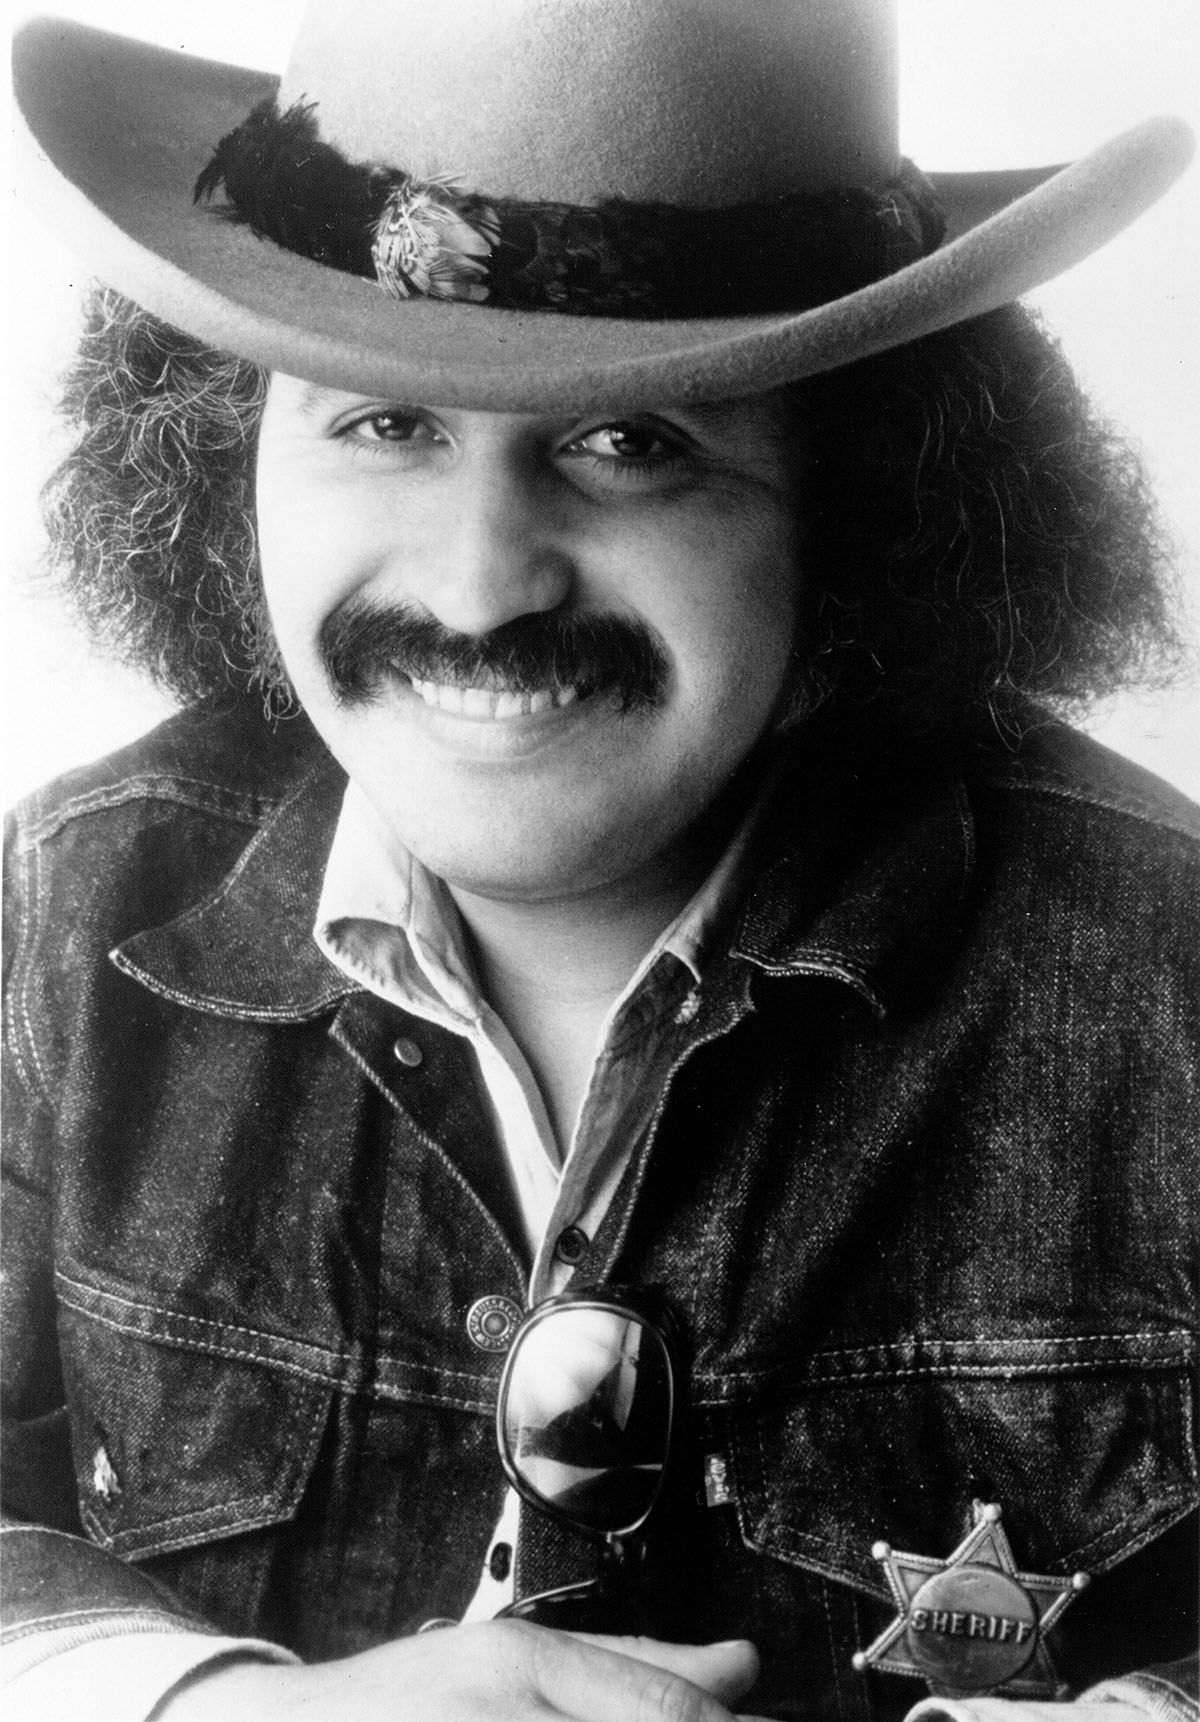 A man in a cowboy hat with long hair smiles in a black and white moustache